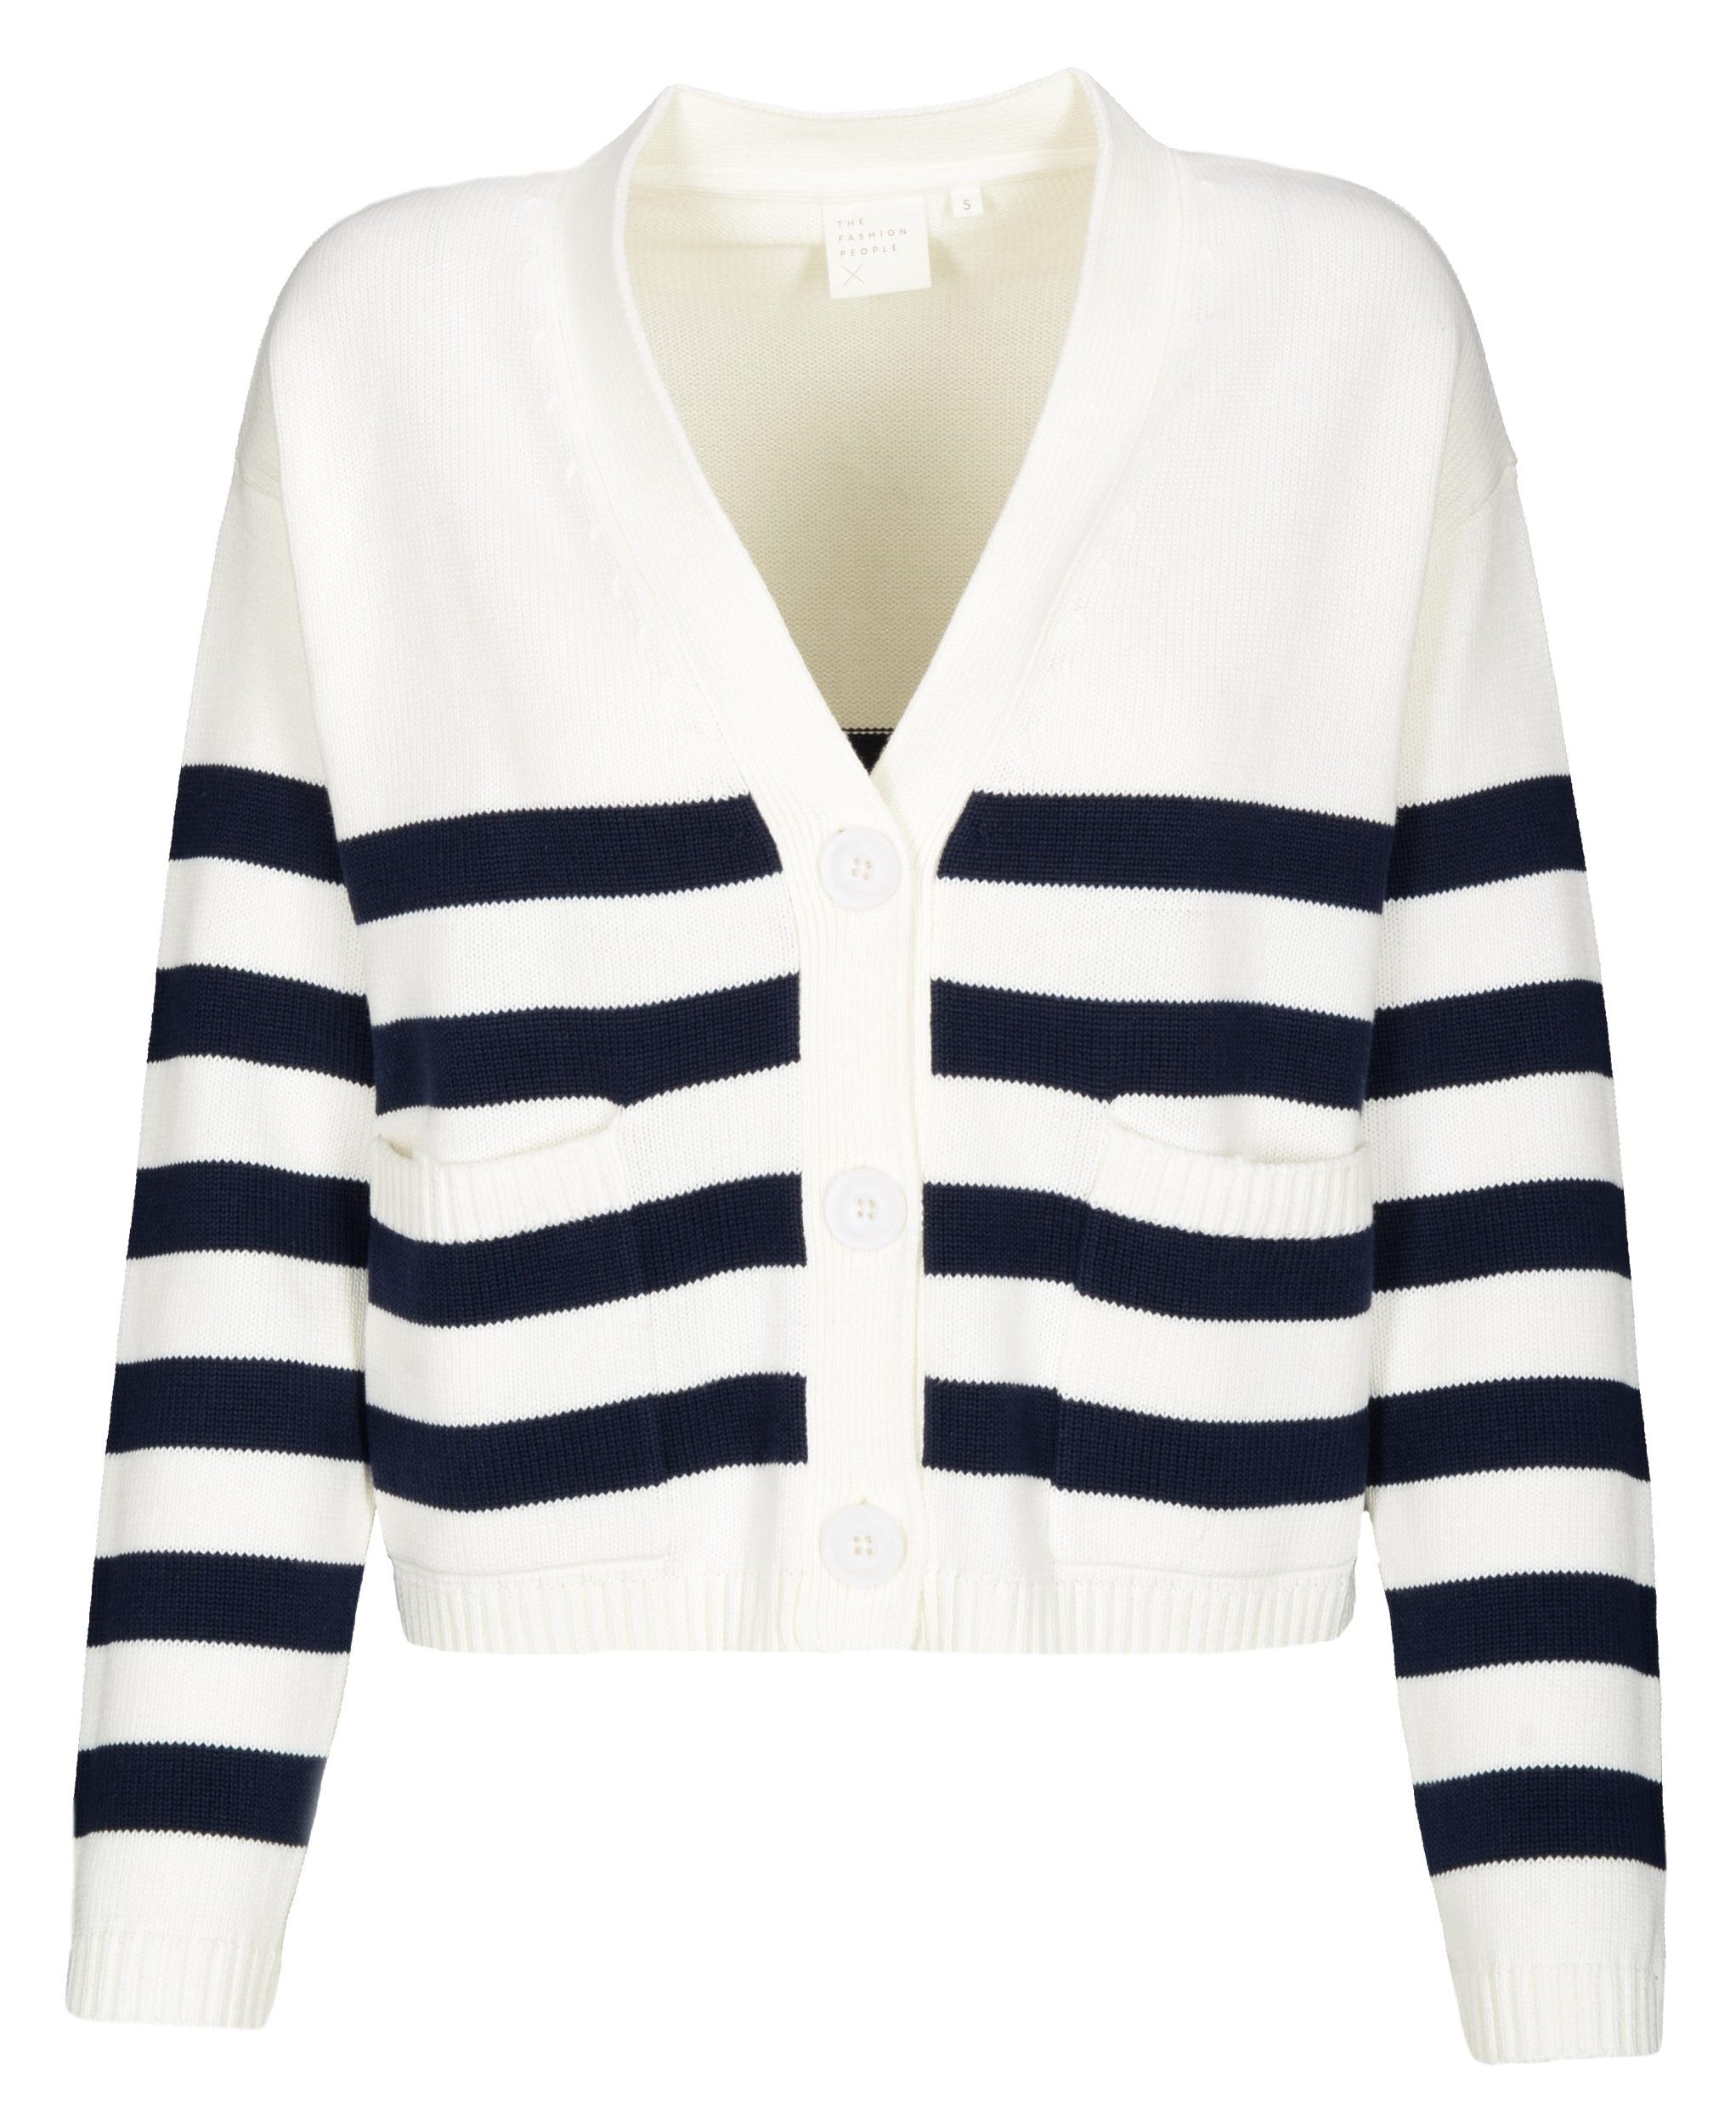 THE FASHION PEOPLE Kurzweste striped cardigan knitted